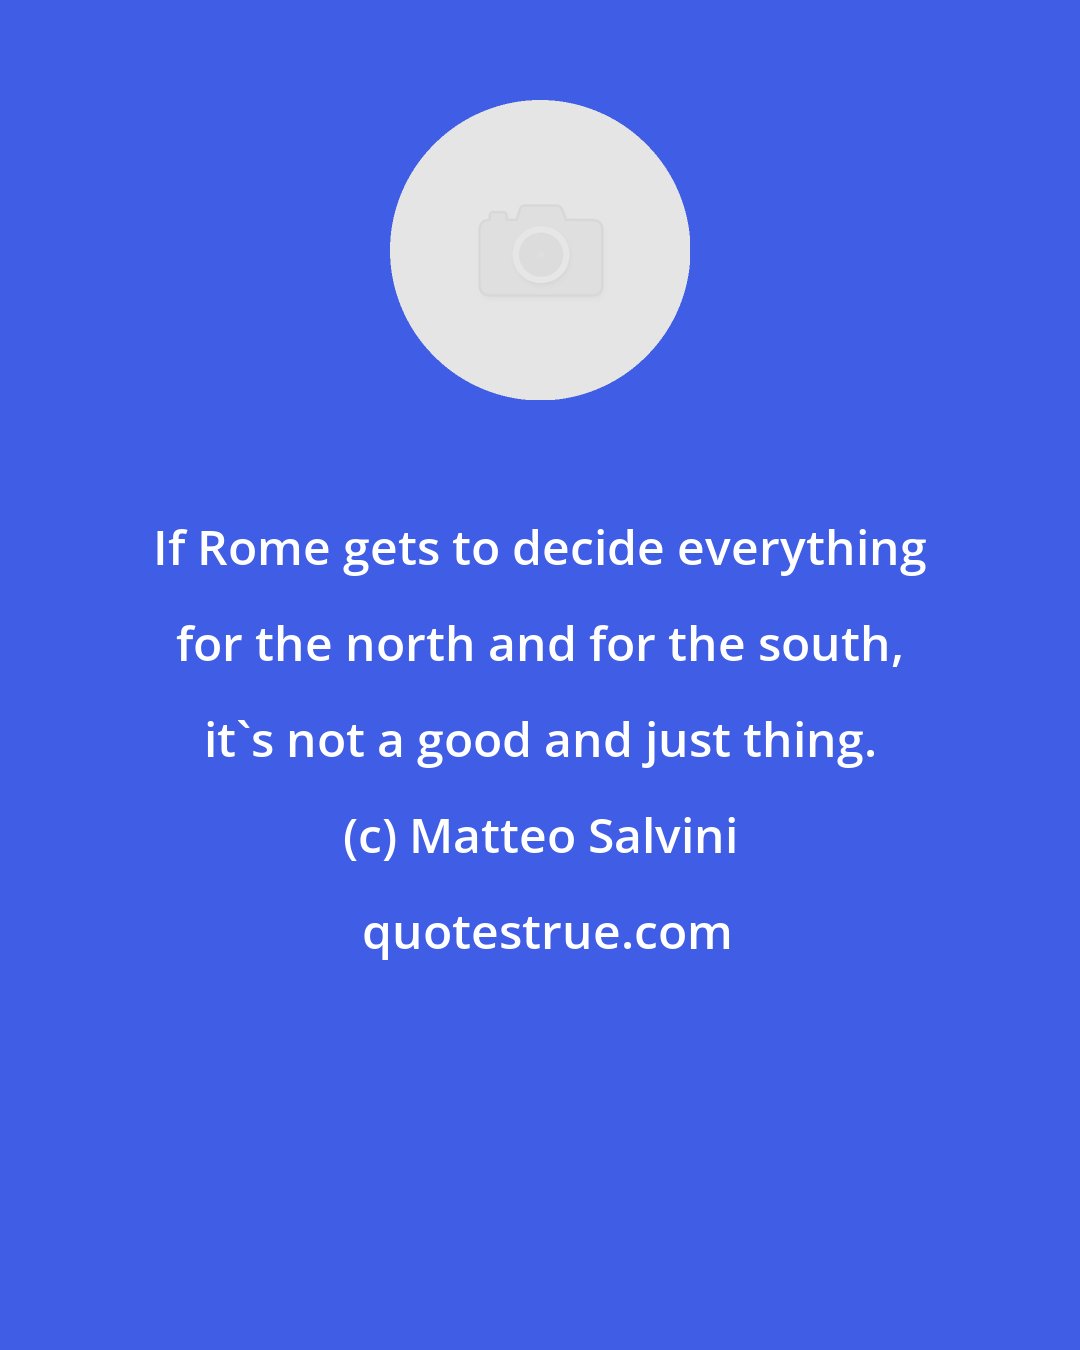 Matteo Salvini: If Rome gets to decide everything for the north and for the south, it's not a good and just thing.